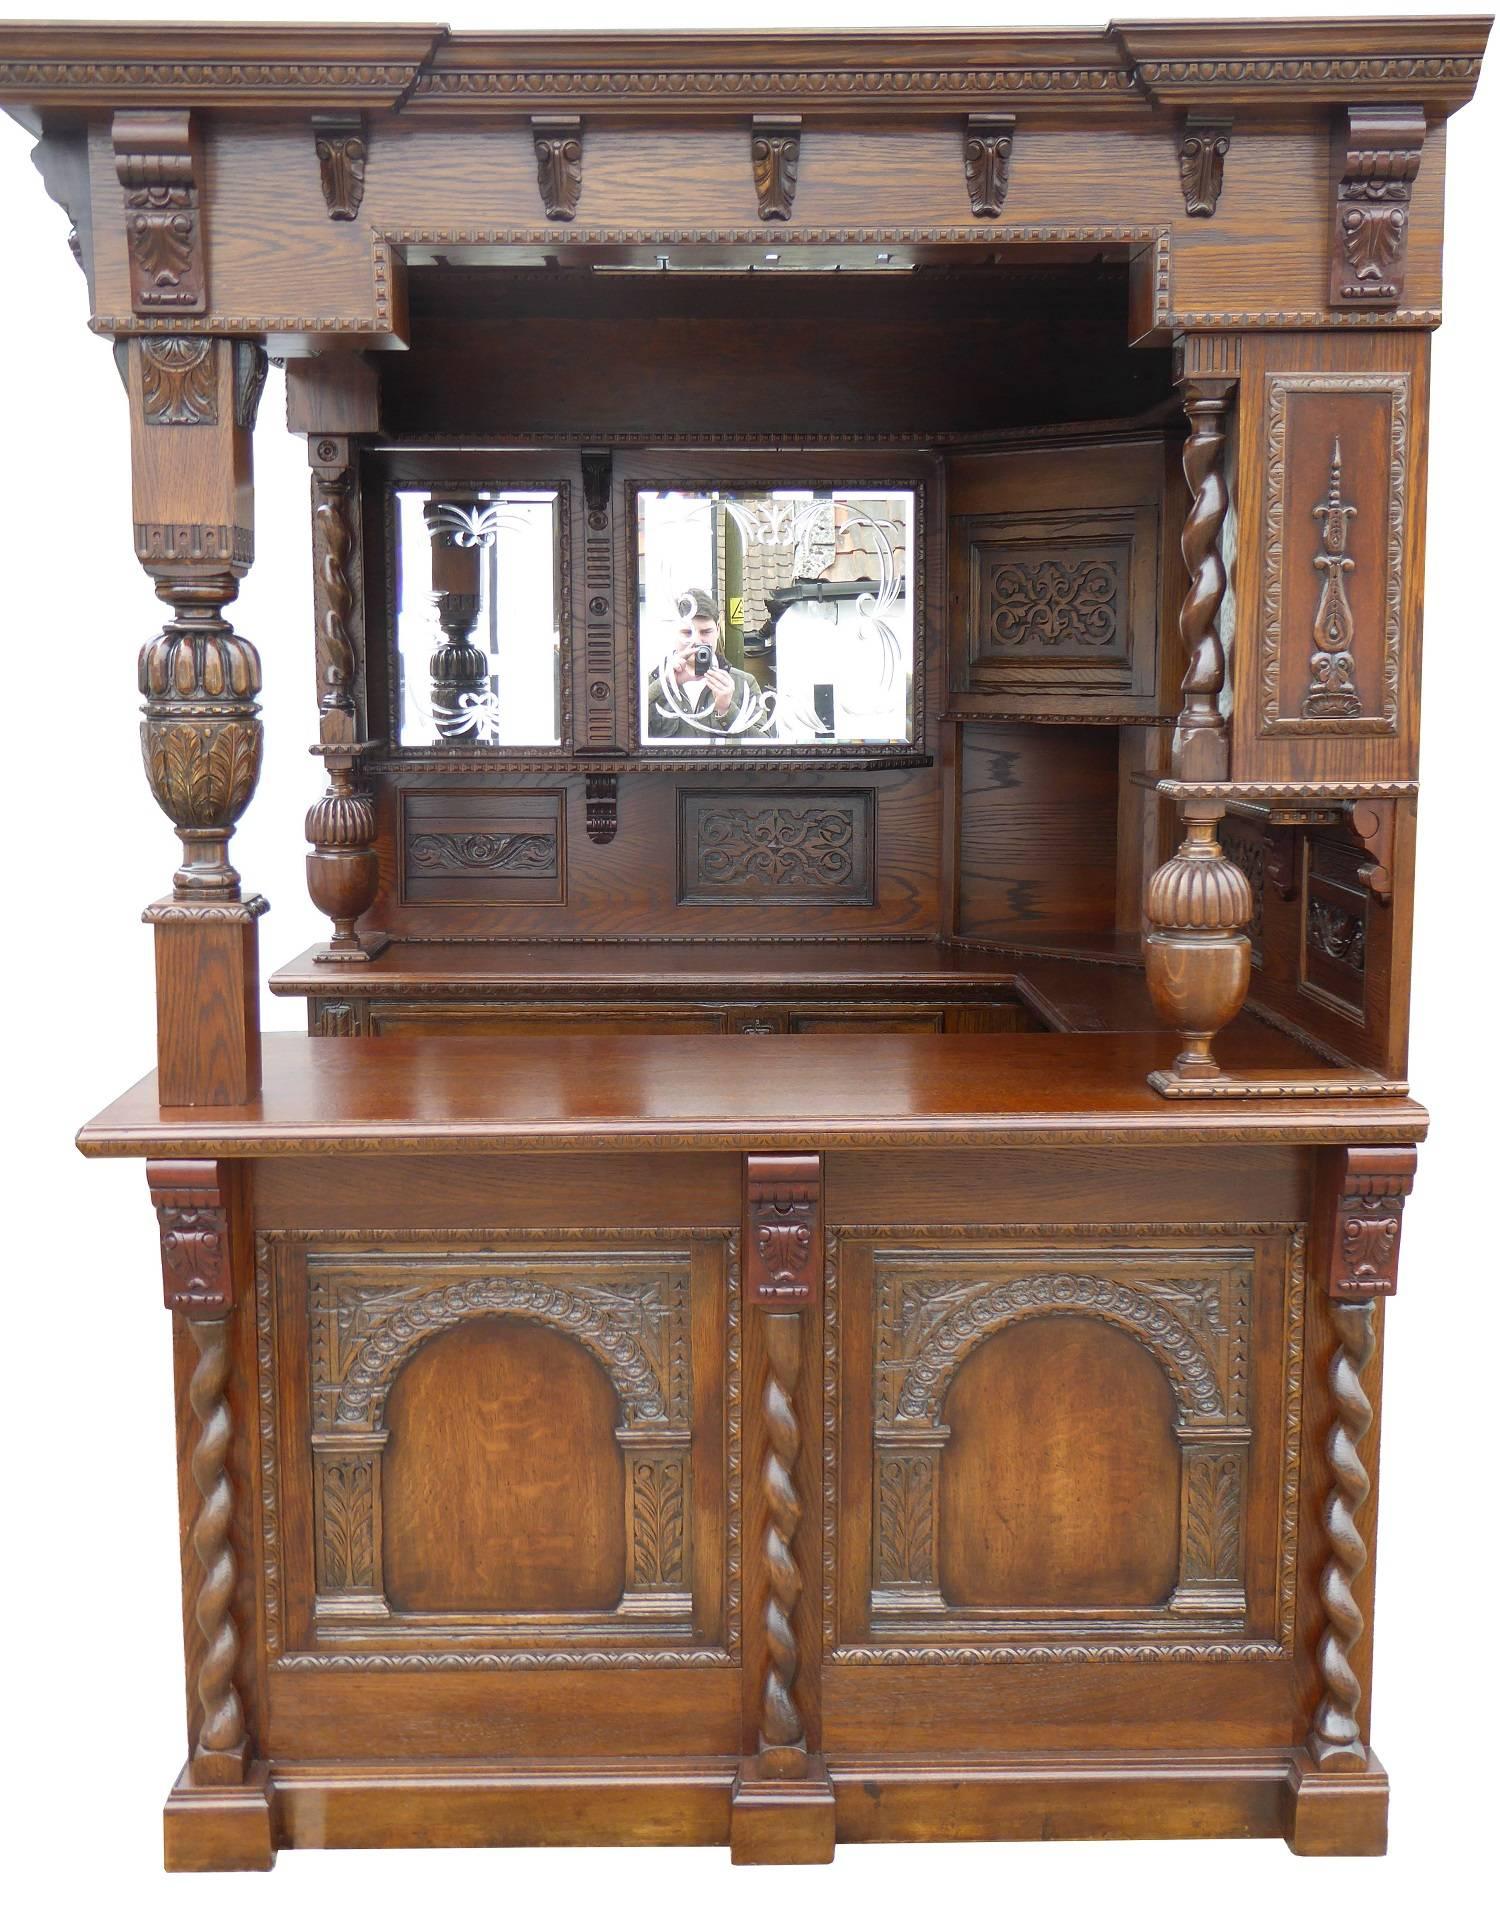 For sale is a good quality, carved oak corner bar. The bar has an inverted breakfront canopy, decorated with carved corbels and a stained glass ceiling. This is supported by the two back sections, each with beveled and hand engraved mirrors, as well